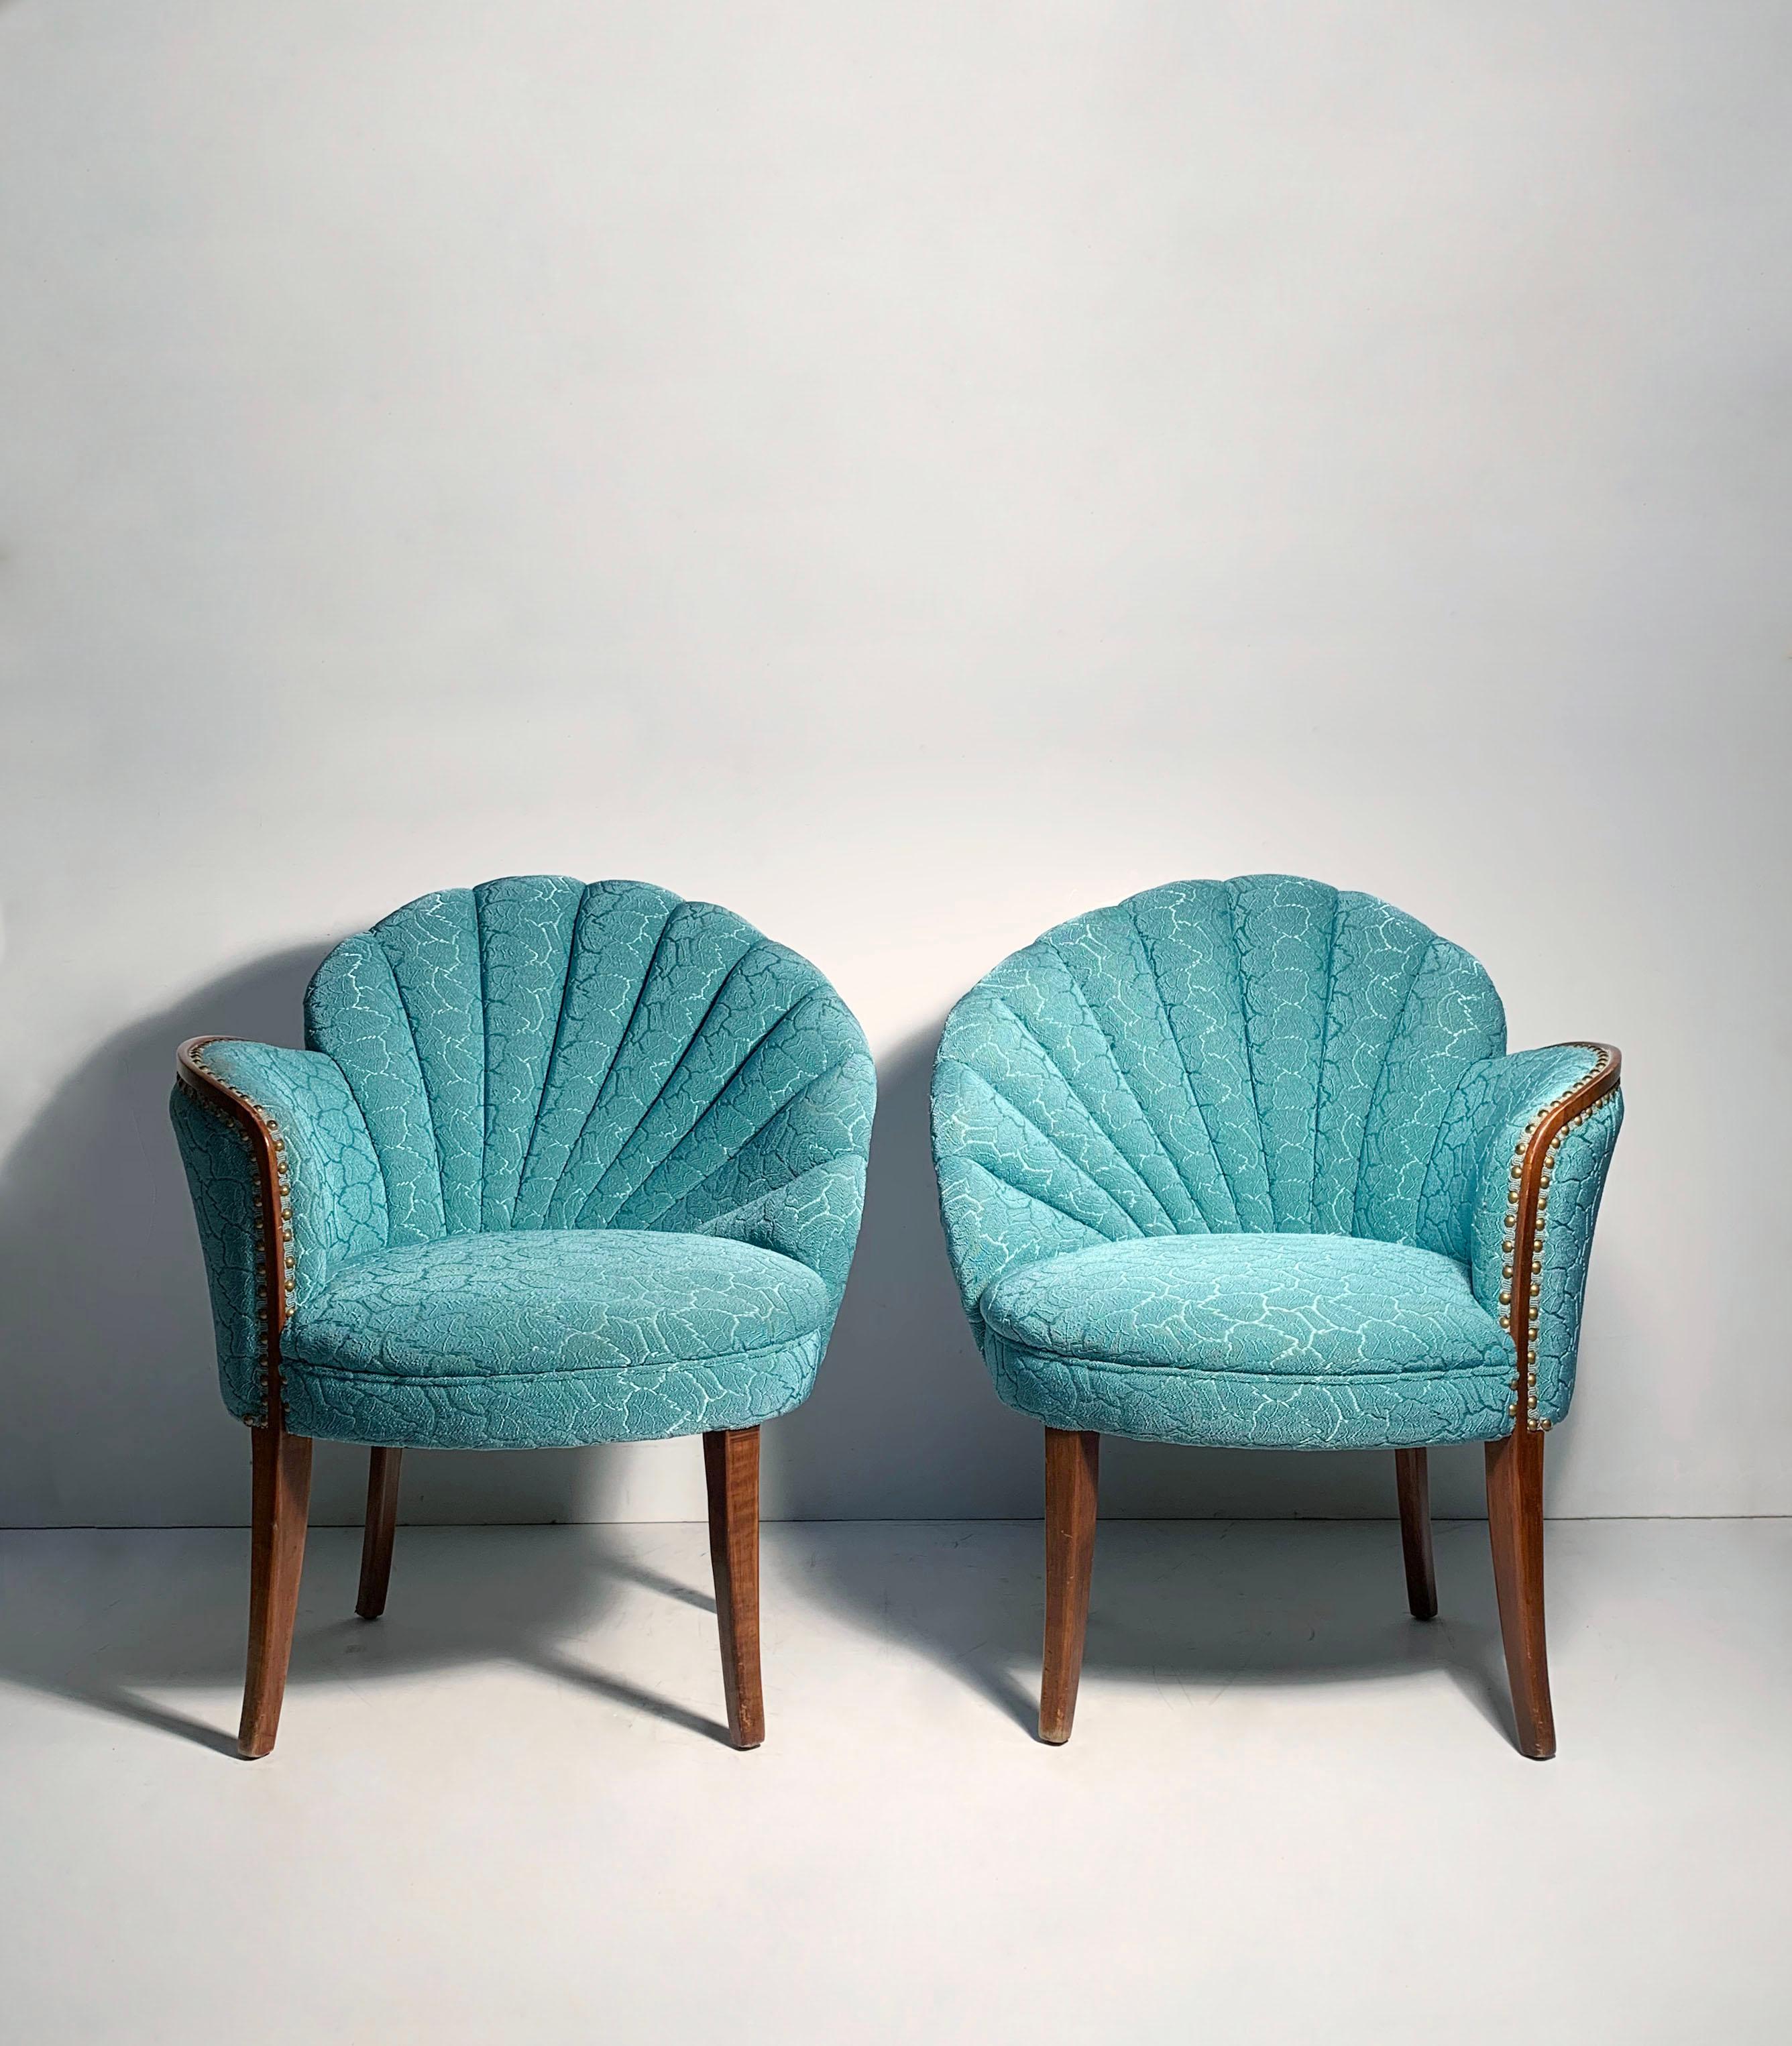 Glamour Pair of Vintage Asymmetrical Fan back chairs.

Original upholstery looks pretty nice. May want to have the undersides addressed though as it is vintage upholstery and there are some fabric staples used that may want to have removed.  Not a